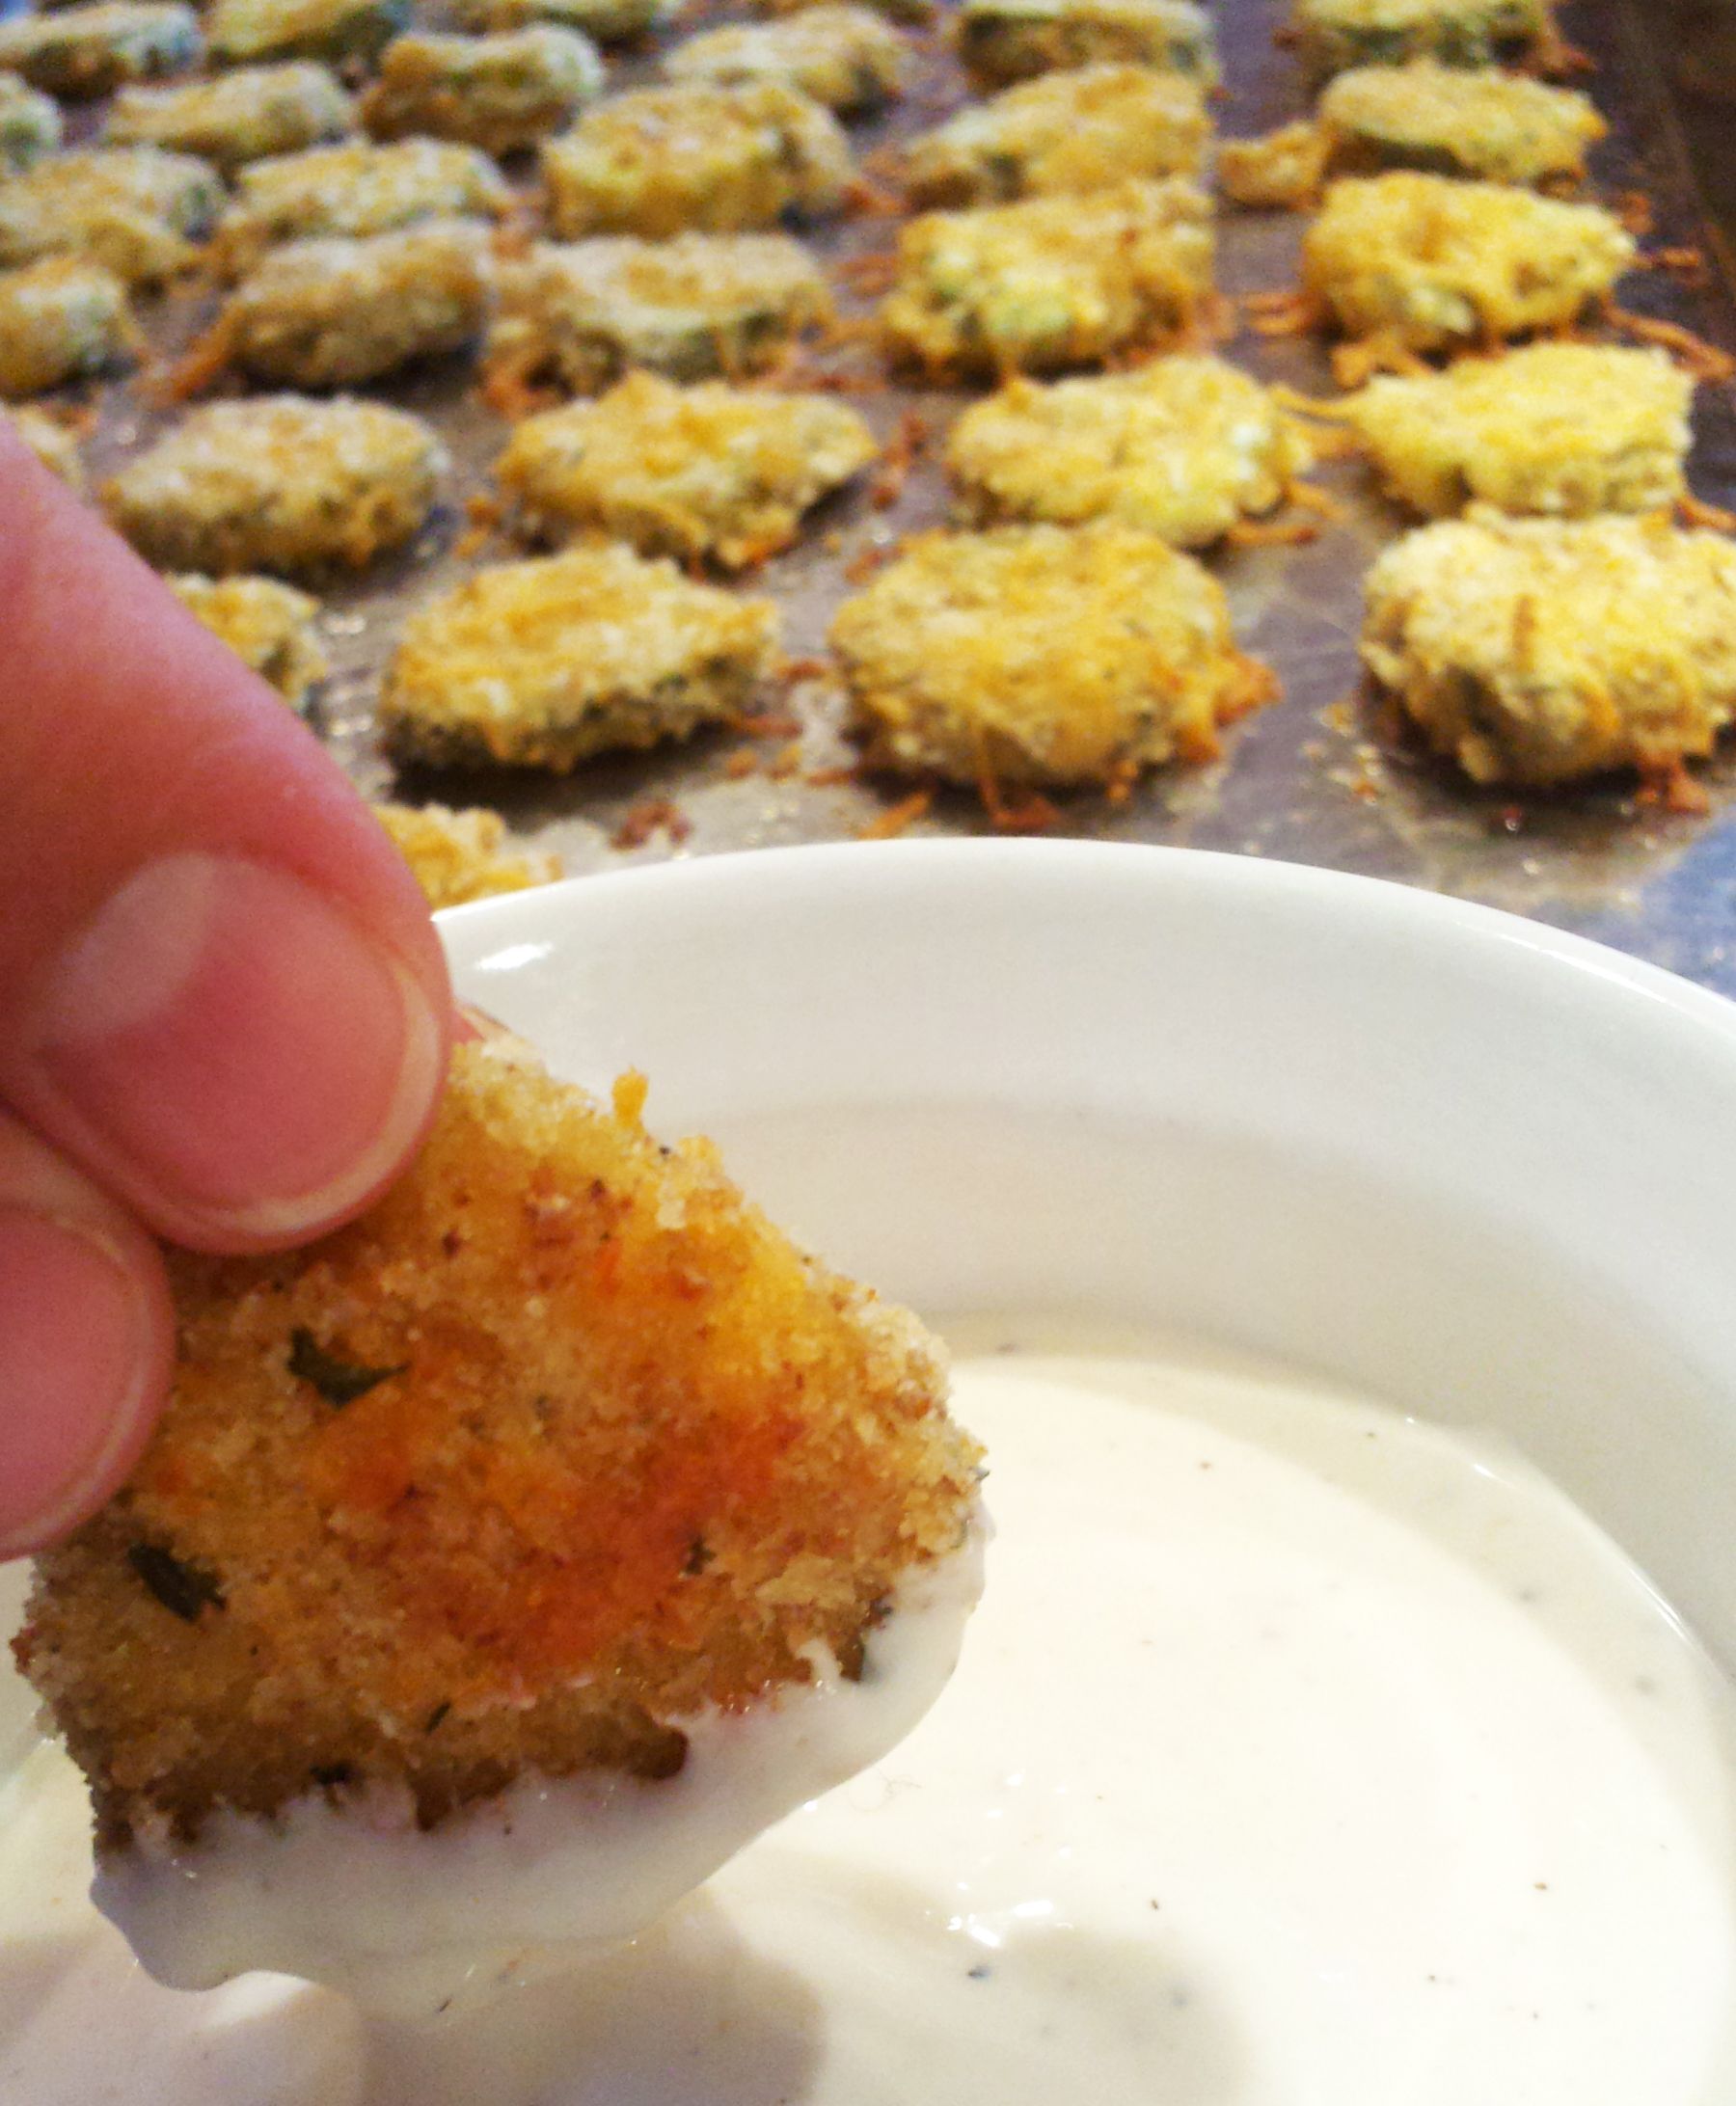 OH.MY.WORD. Baked "fried" pickles. I can eat all the "fried"